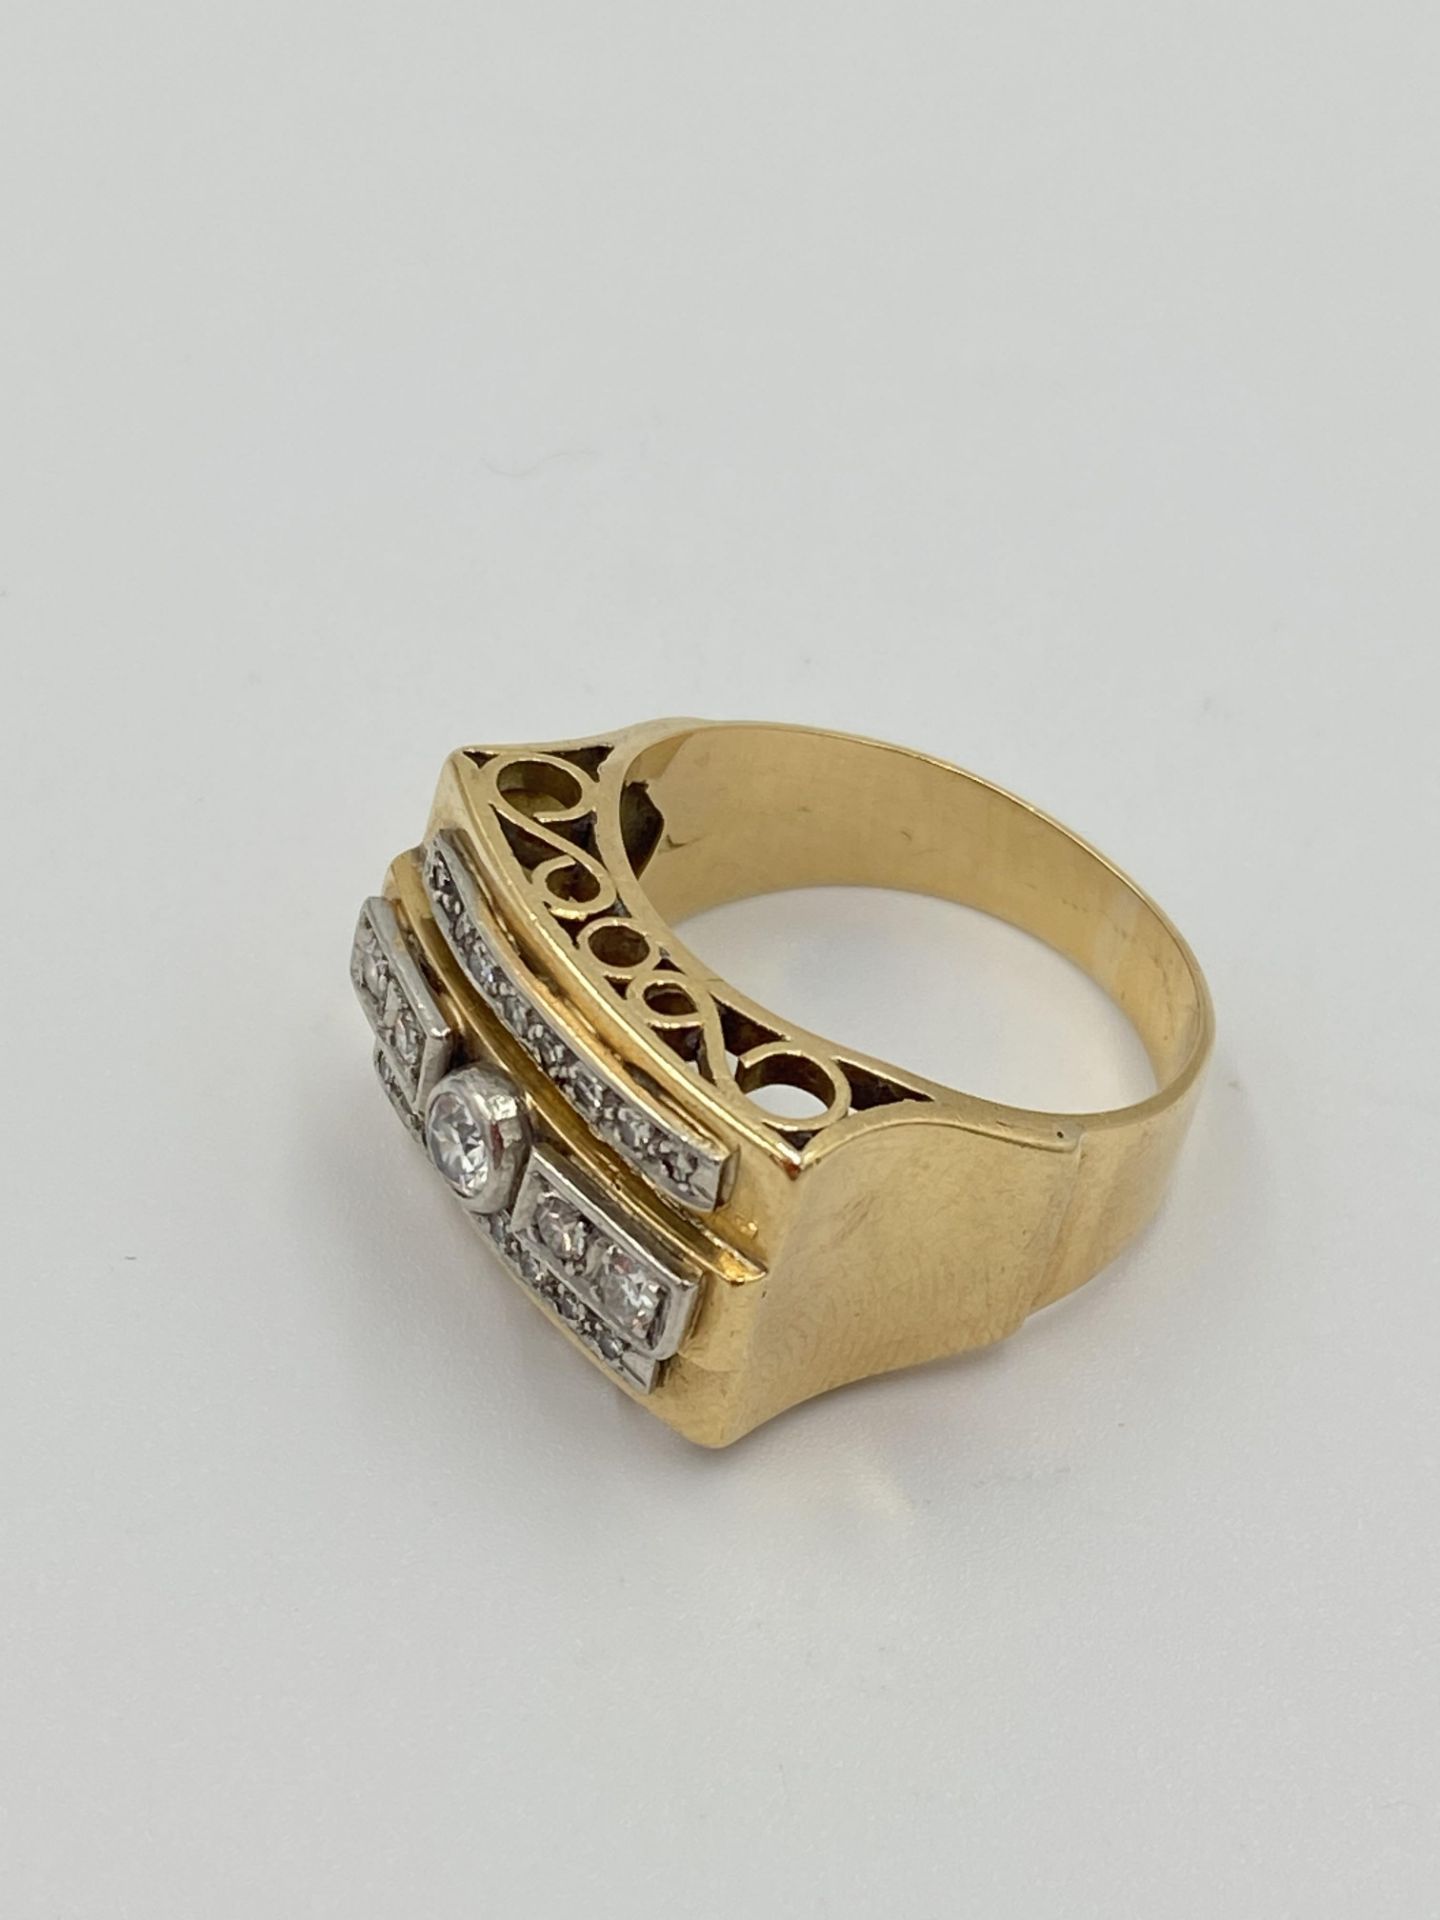 18ct gold and diamond ring - Image 4 of 4